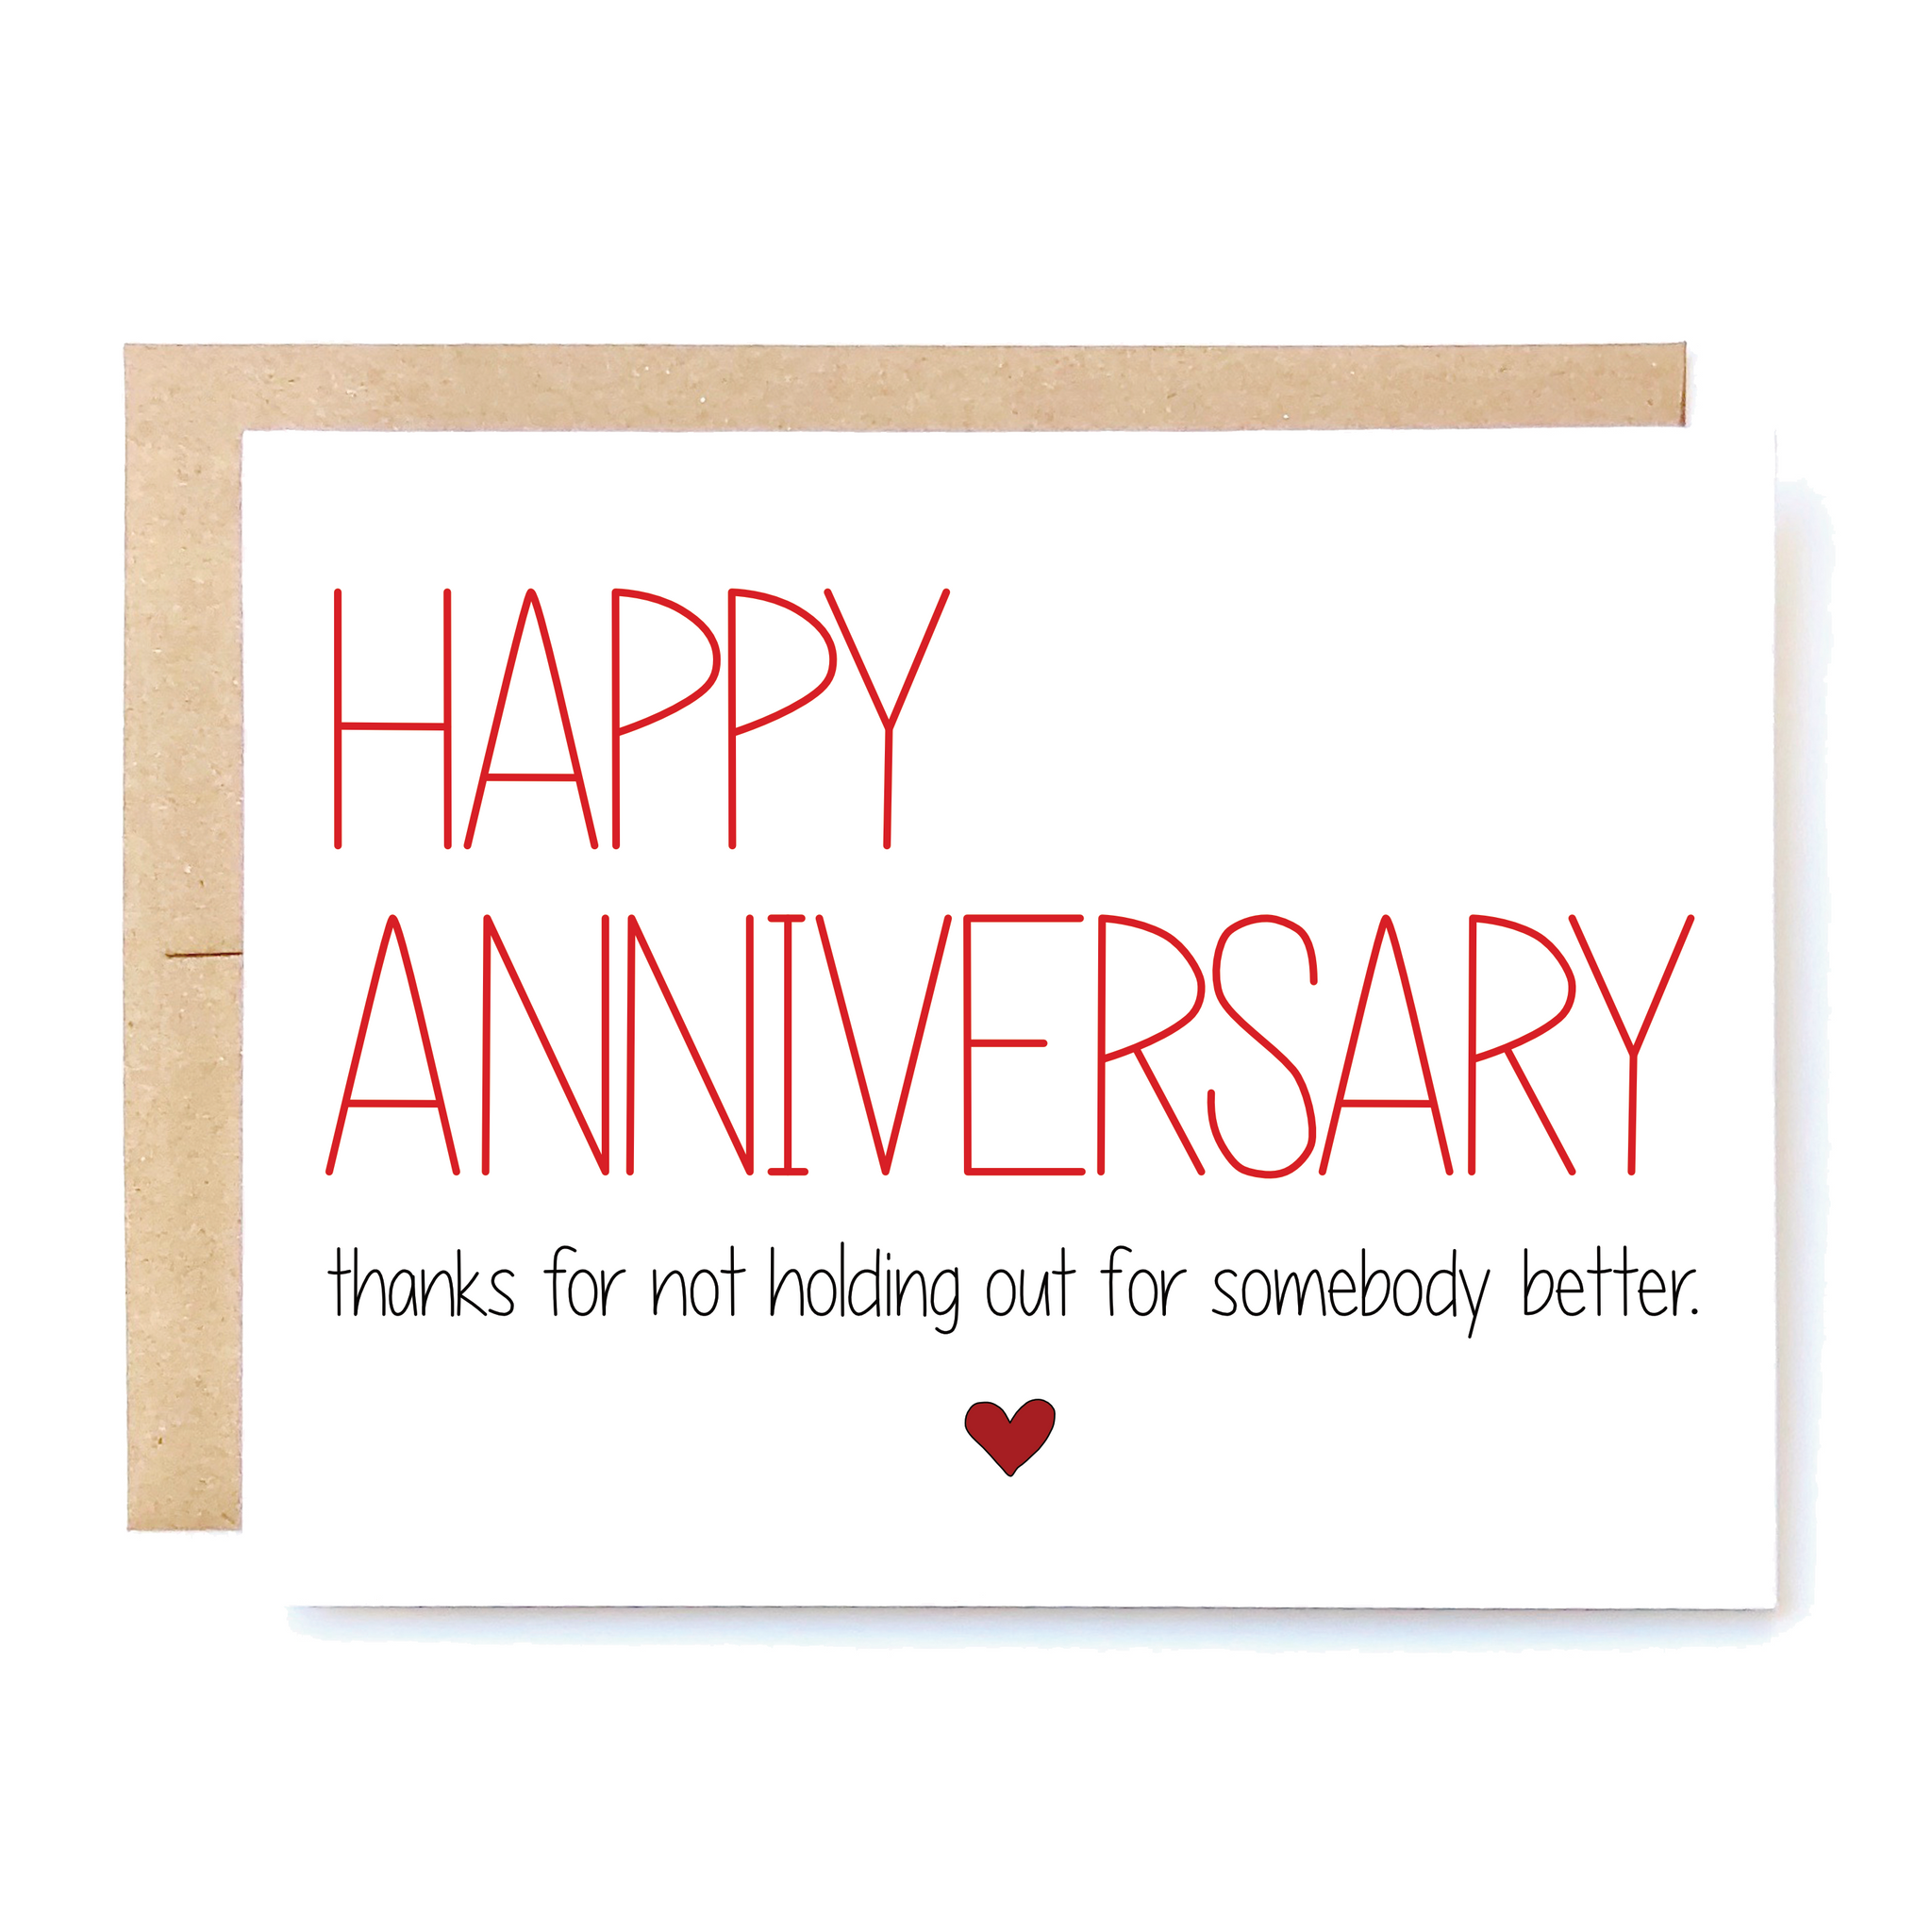 Card Front: Happy anniversary. Thanks for not holding out for somebody better.